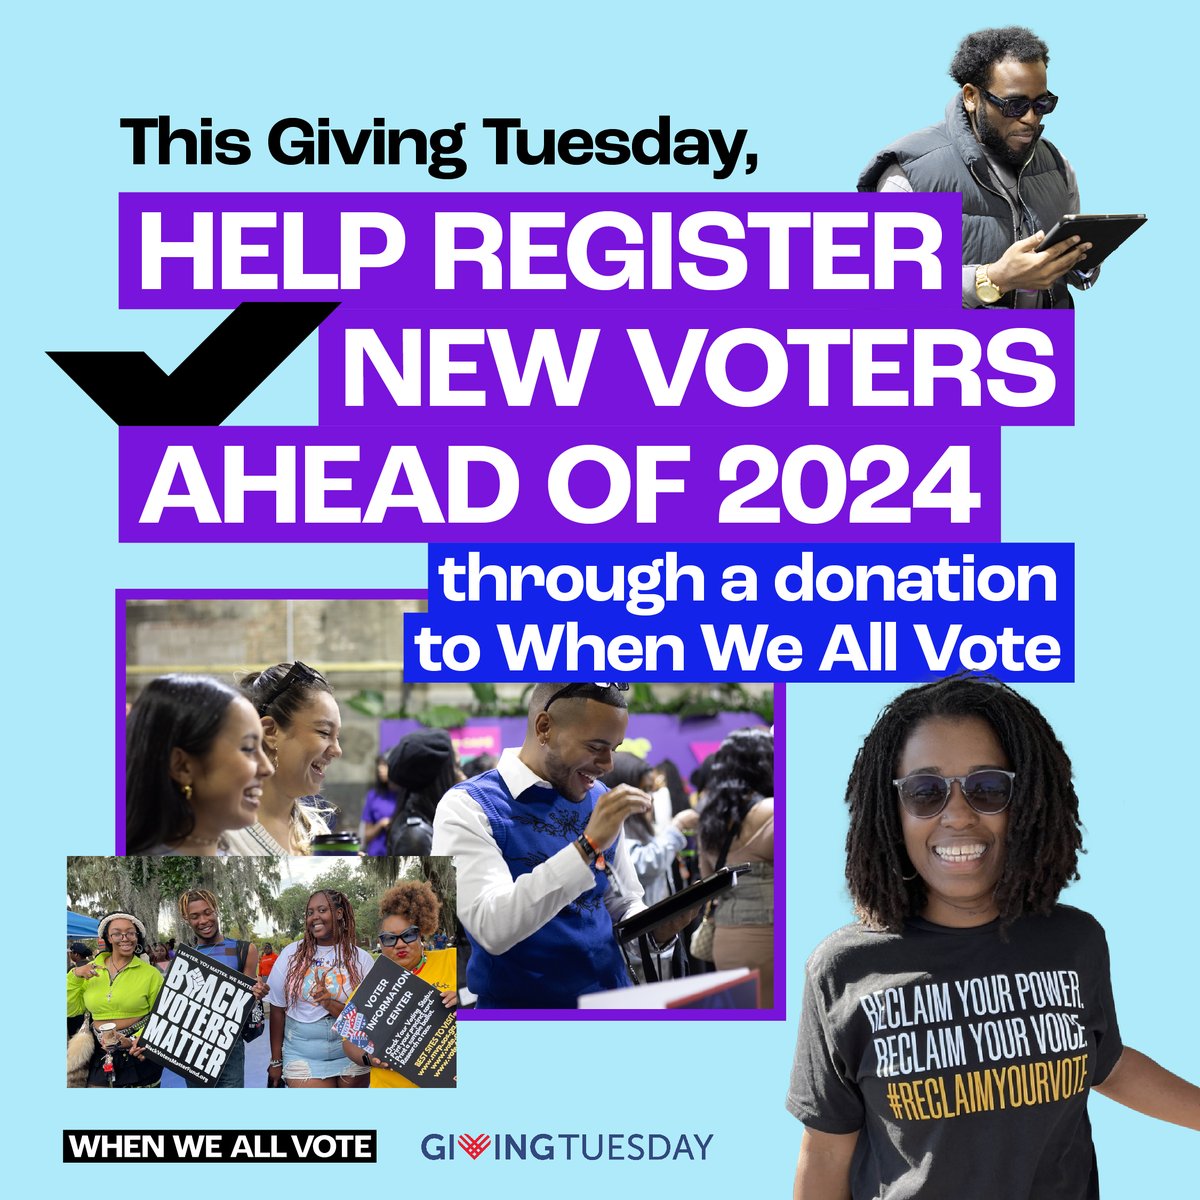 We all know 2024 is a BIG election year, so we’re already planning how to register and turn out MORE voters than ever before! Join us in gearing up for the year ahead. Make a #GivingTuesday gift that will power our work to reach voters across the country: weall.vote/givingtuesday